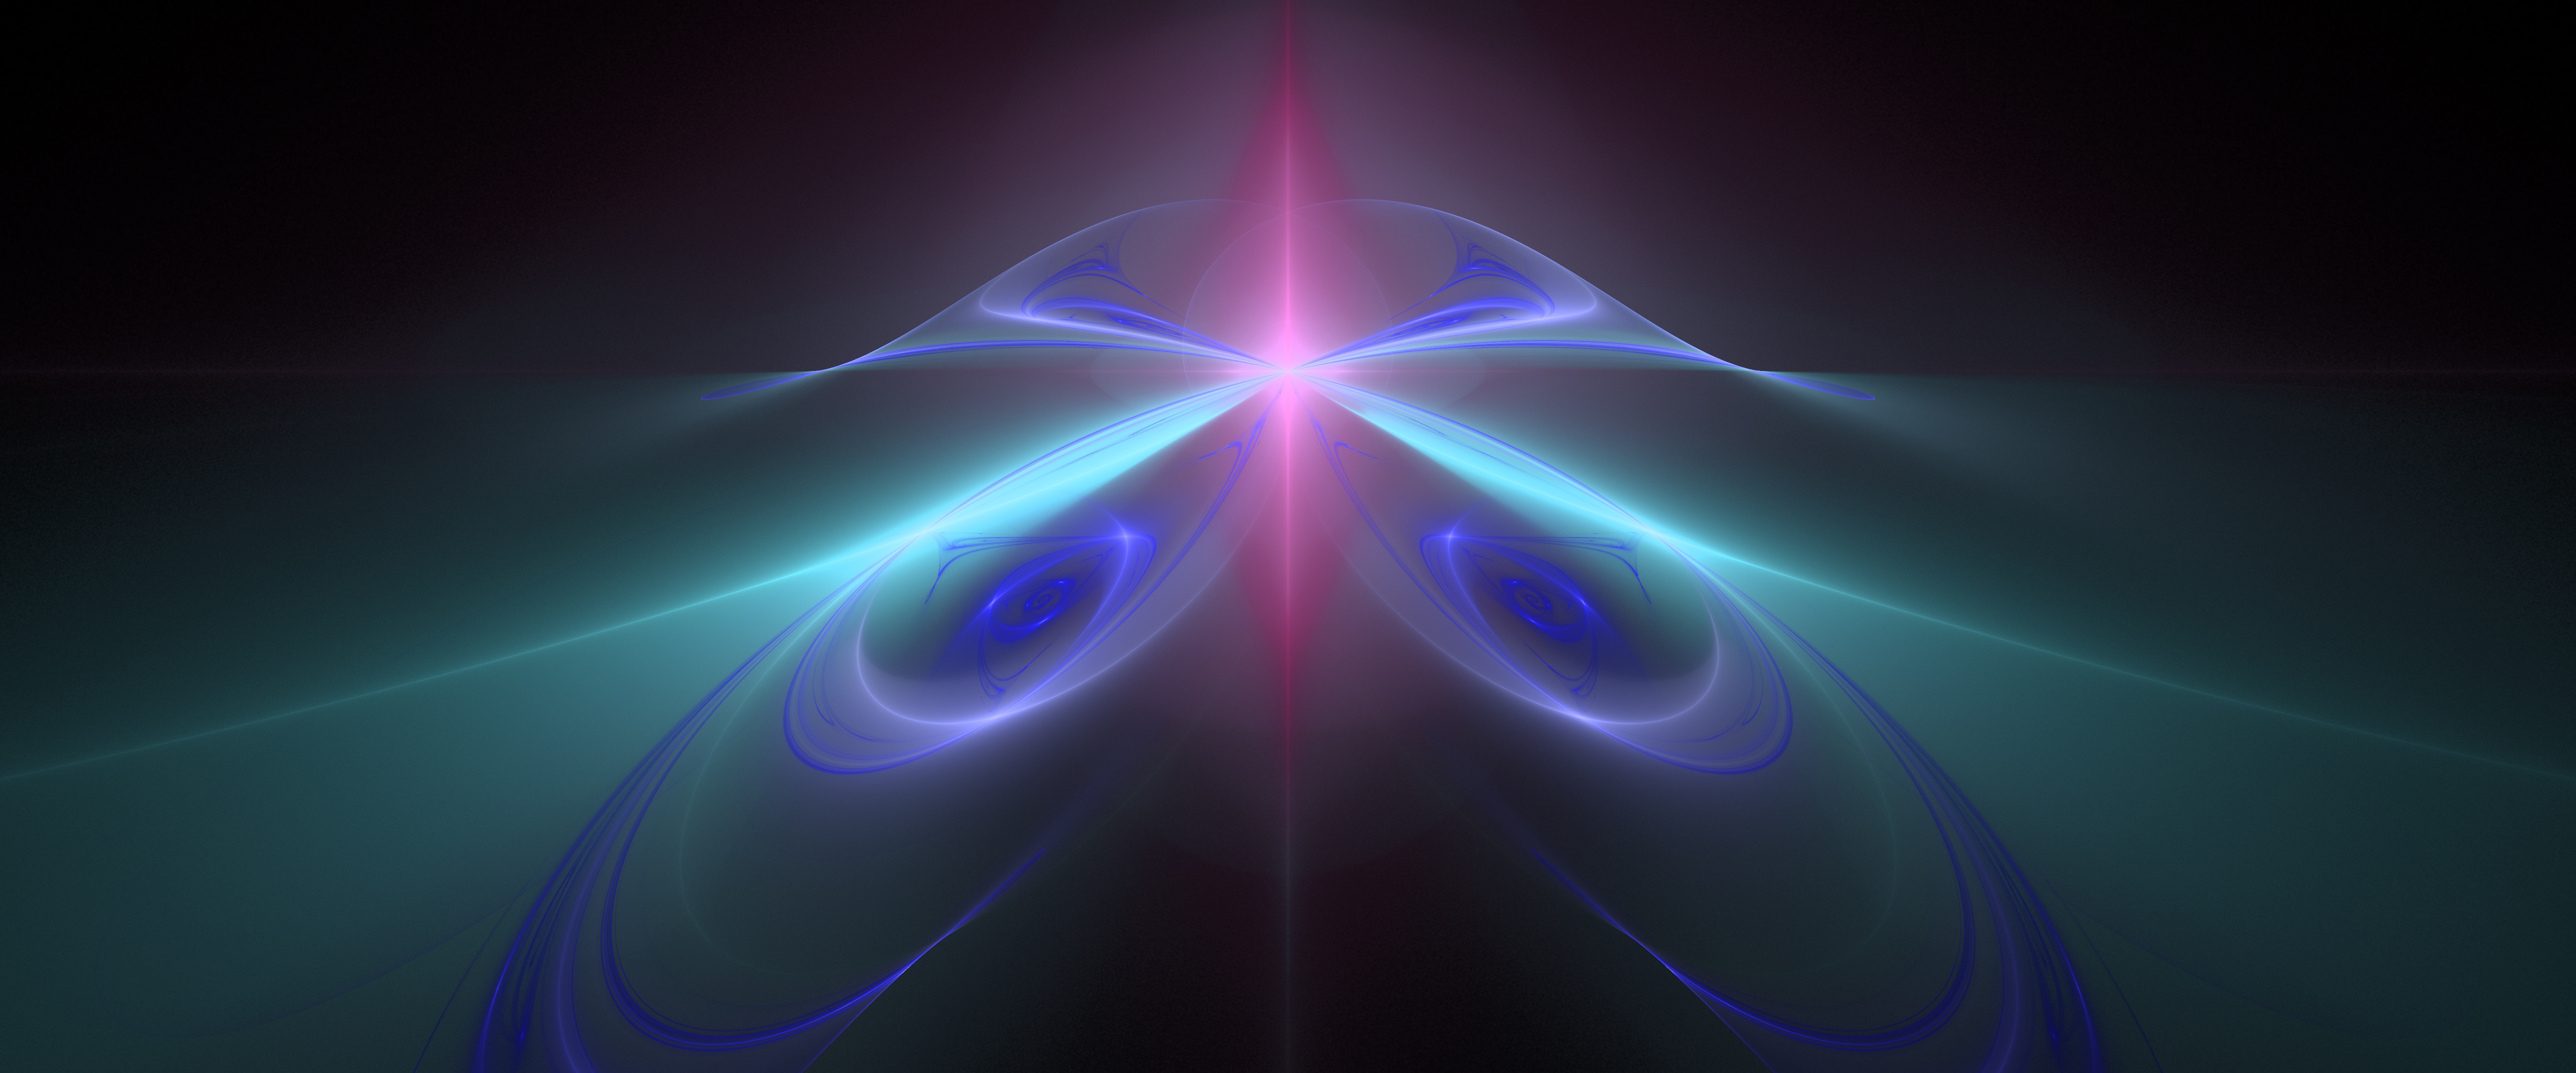 General 5760x2400 fractal fractal flame pattern symmetry bright abstract psychedelic mathematics wide screen technology